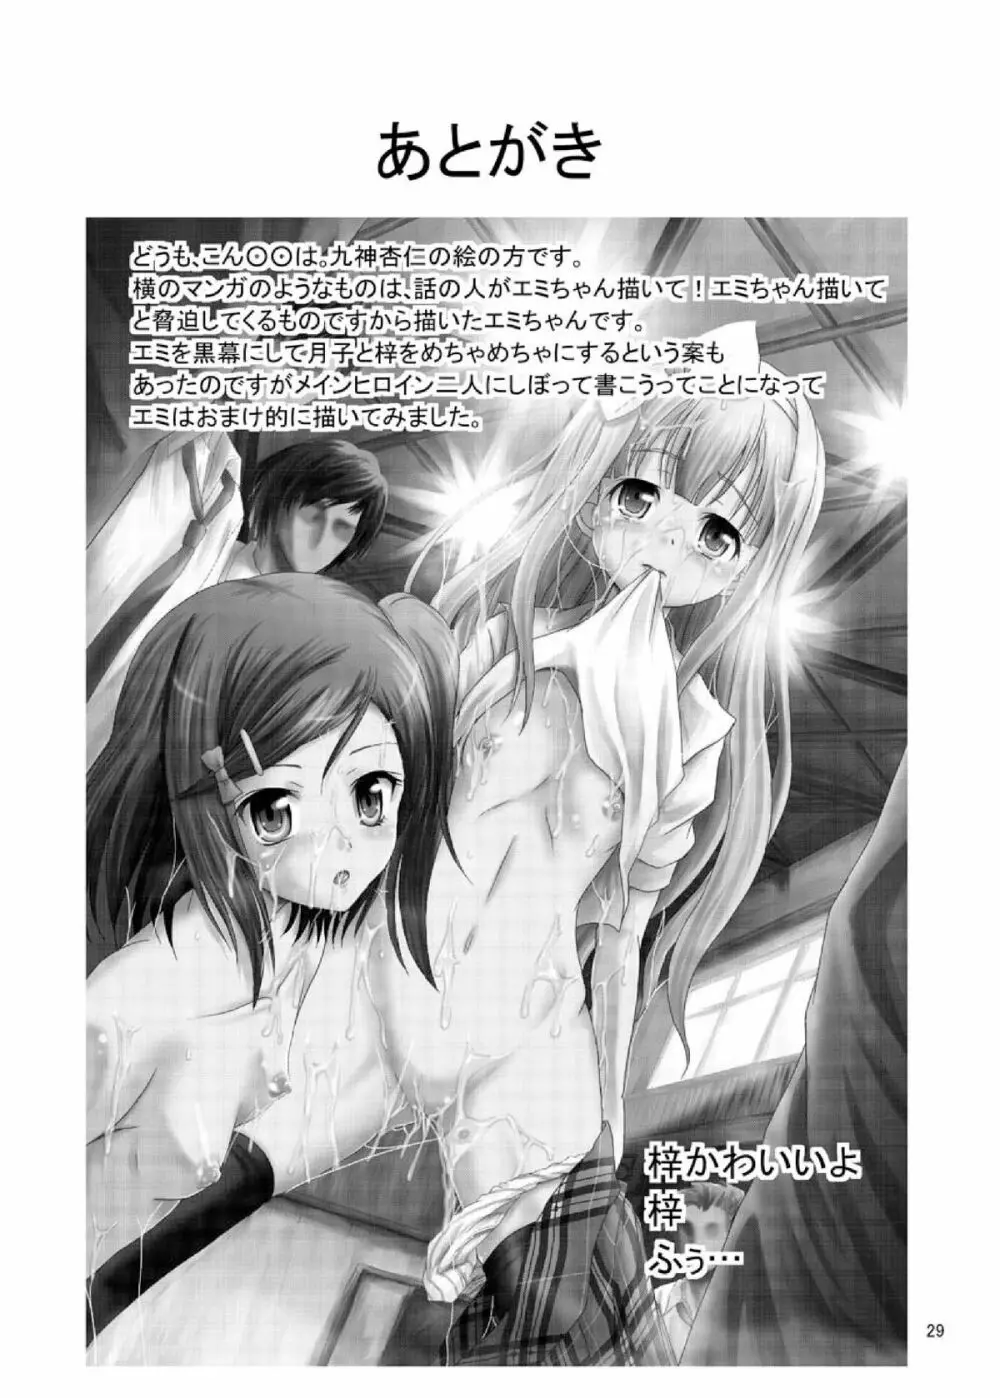 ARCANUMS 20 配信はじめました - page29